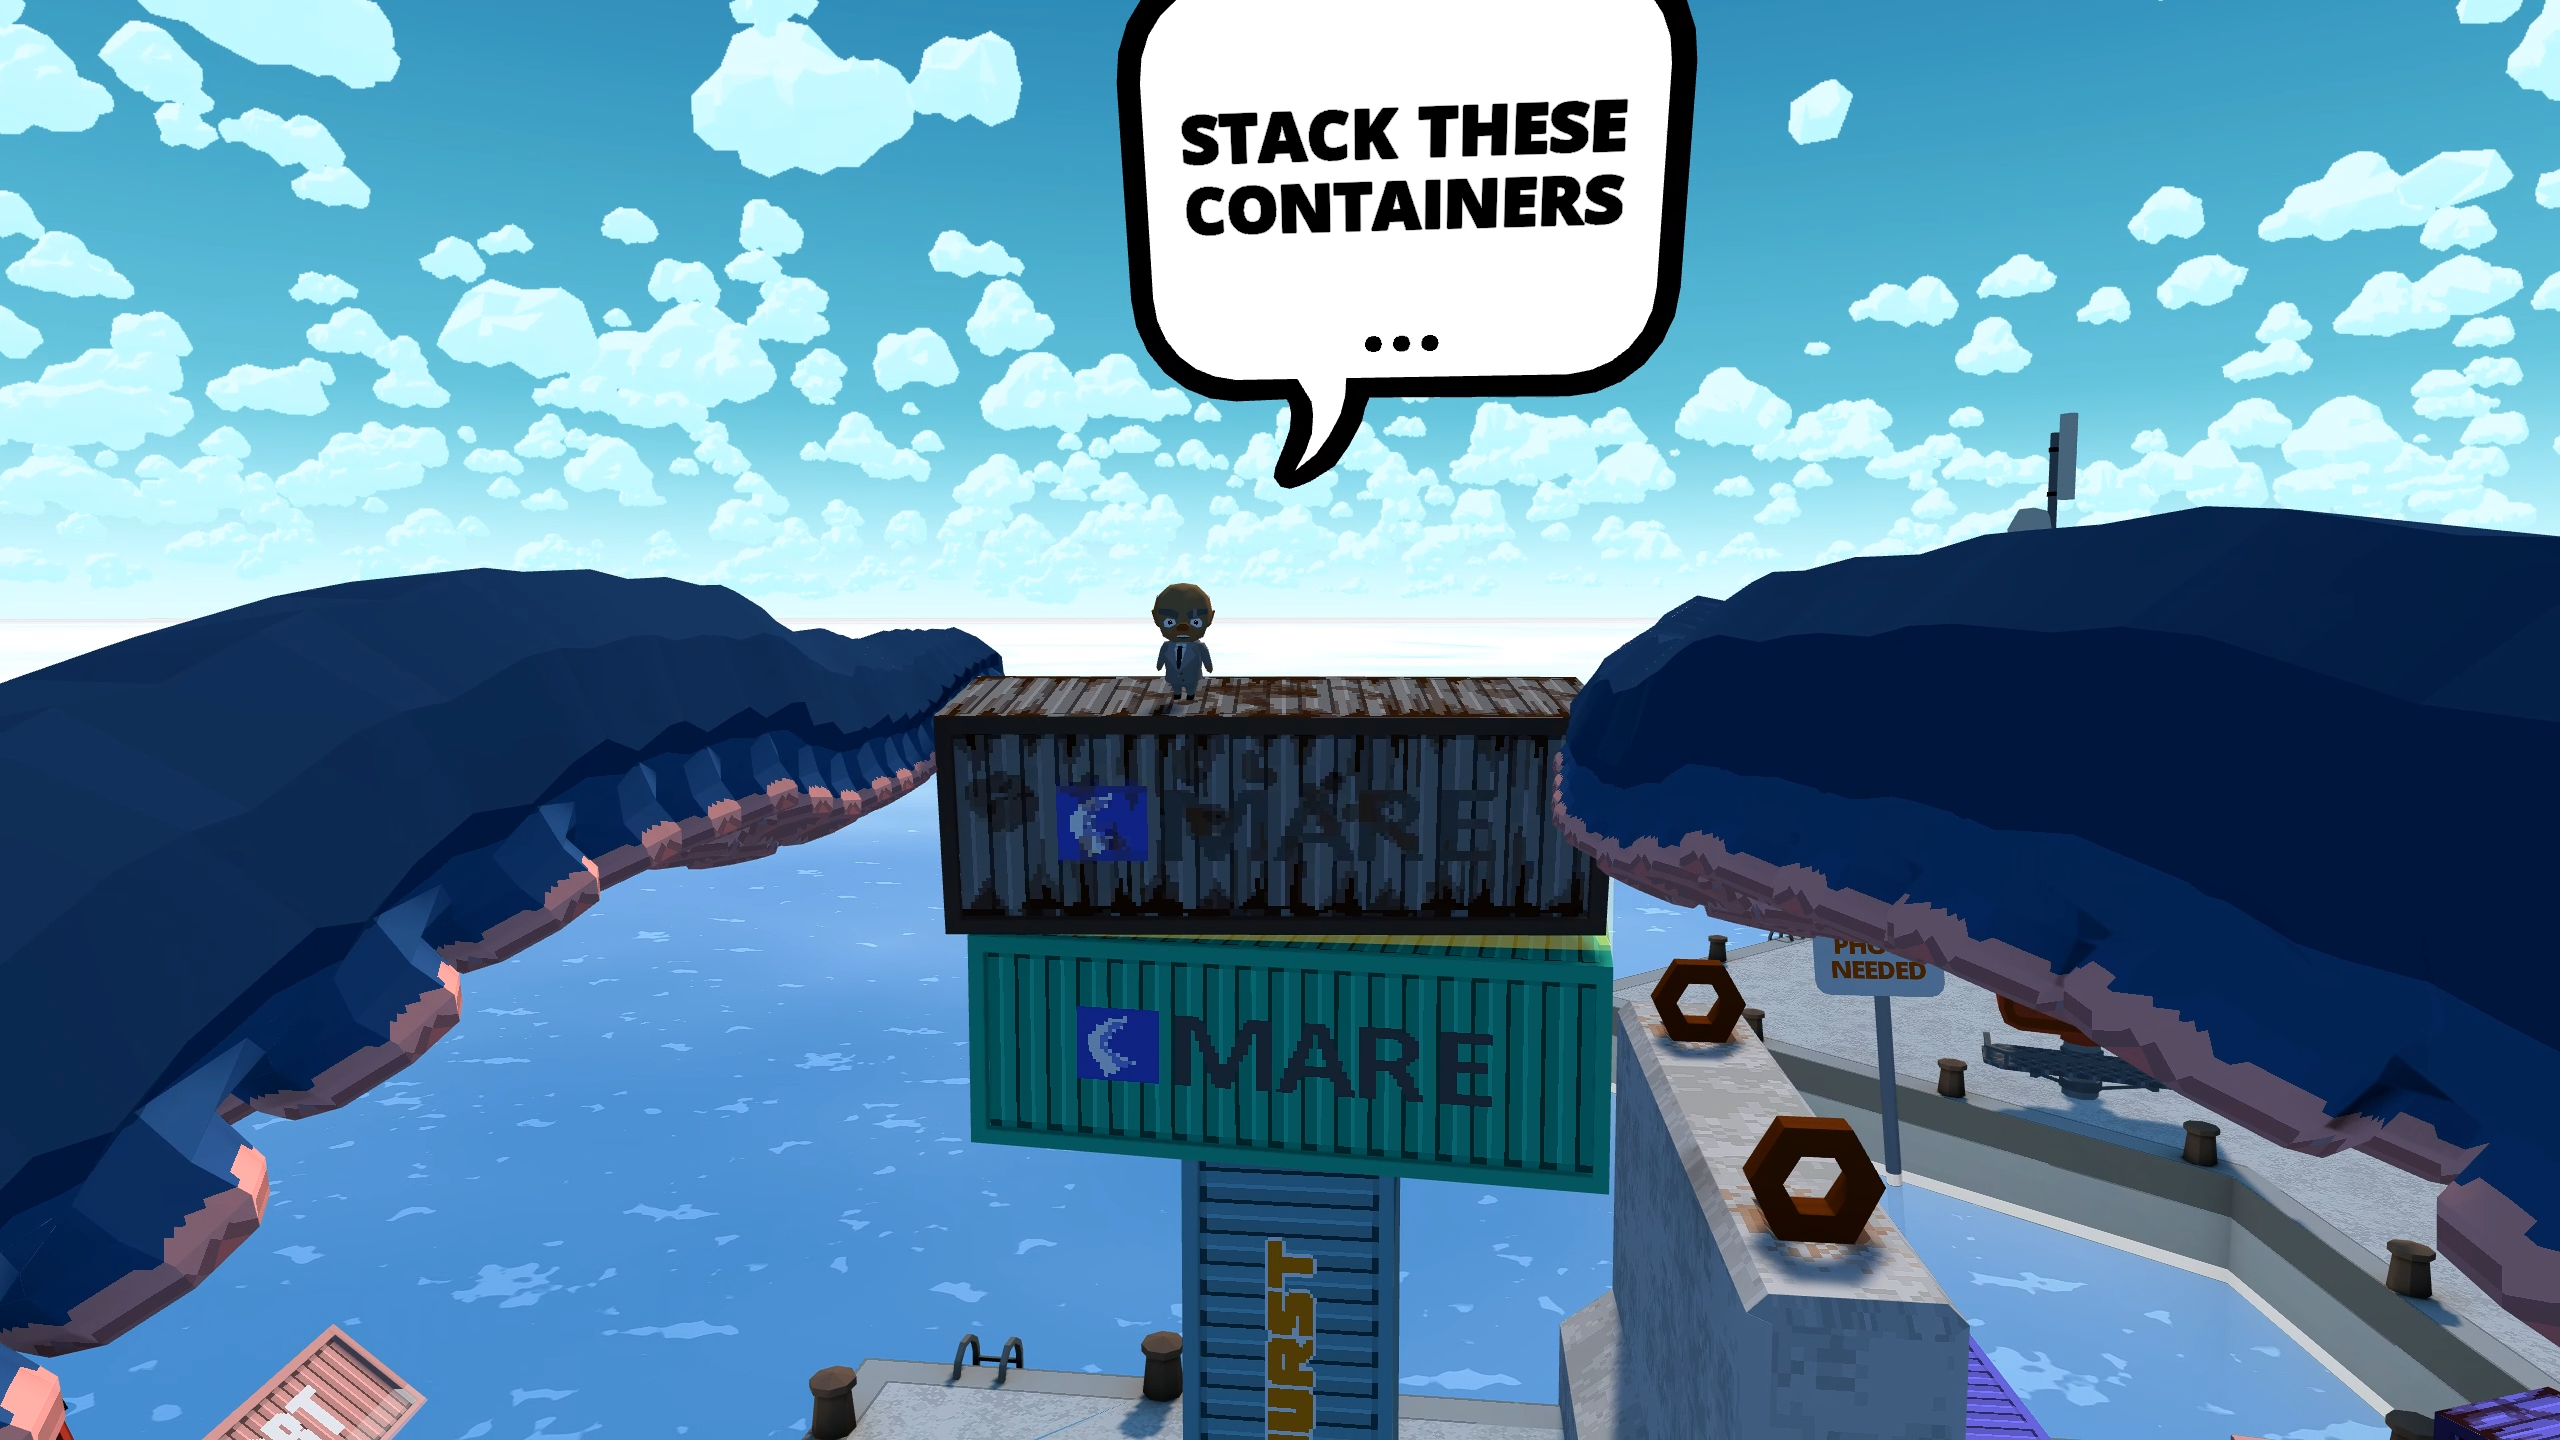 A little man is standing on containers, ordering an octopus to stack them